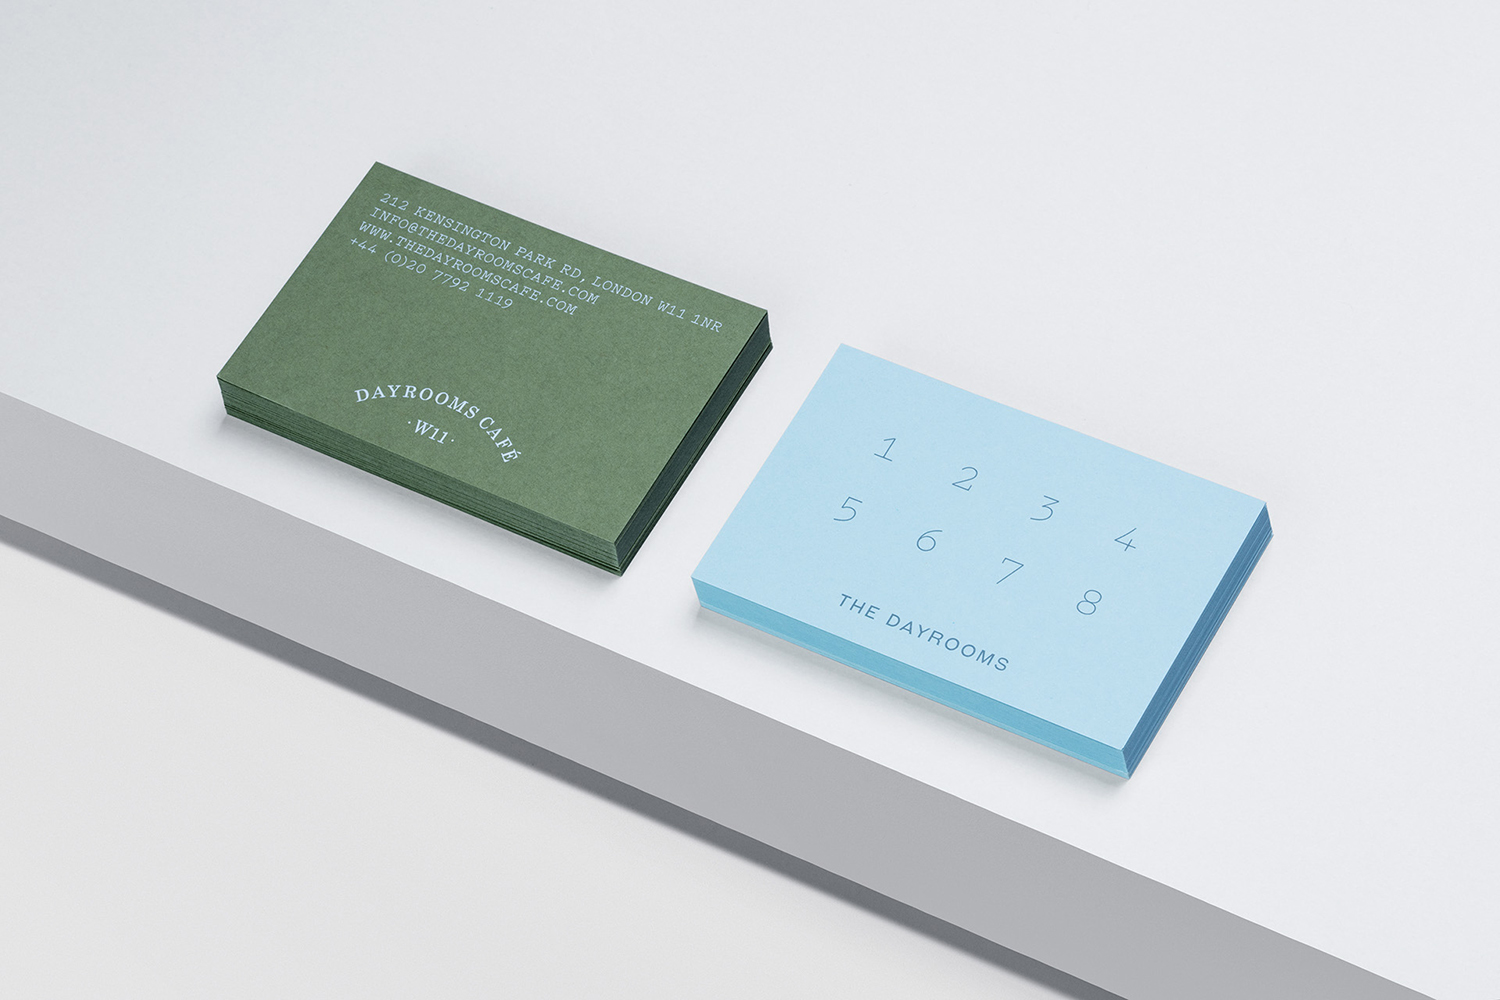 Graphic identity and loyalty cards for The Dayrooms Cafe designed by Two Times Elliott